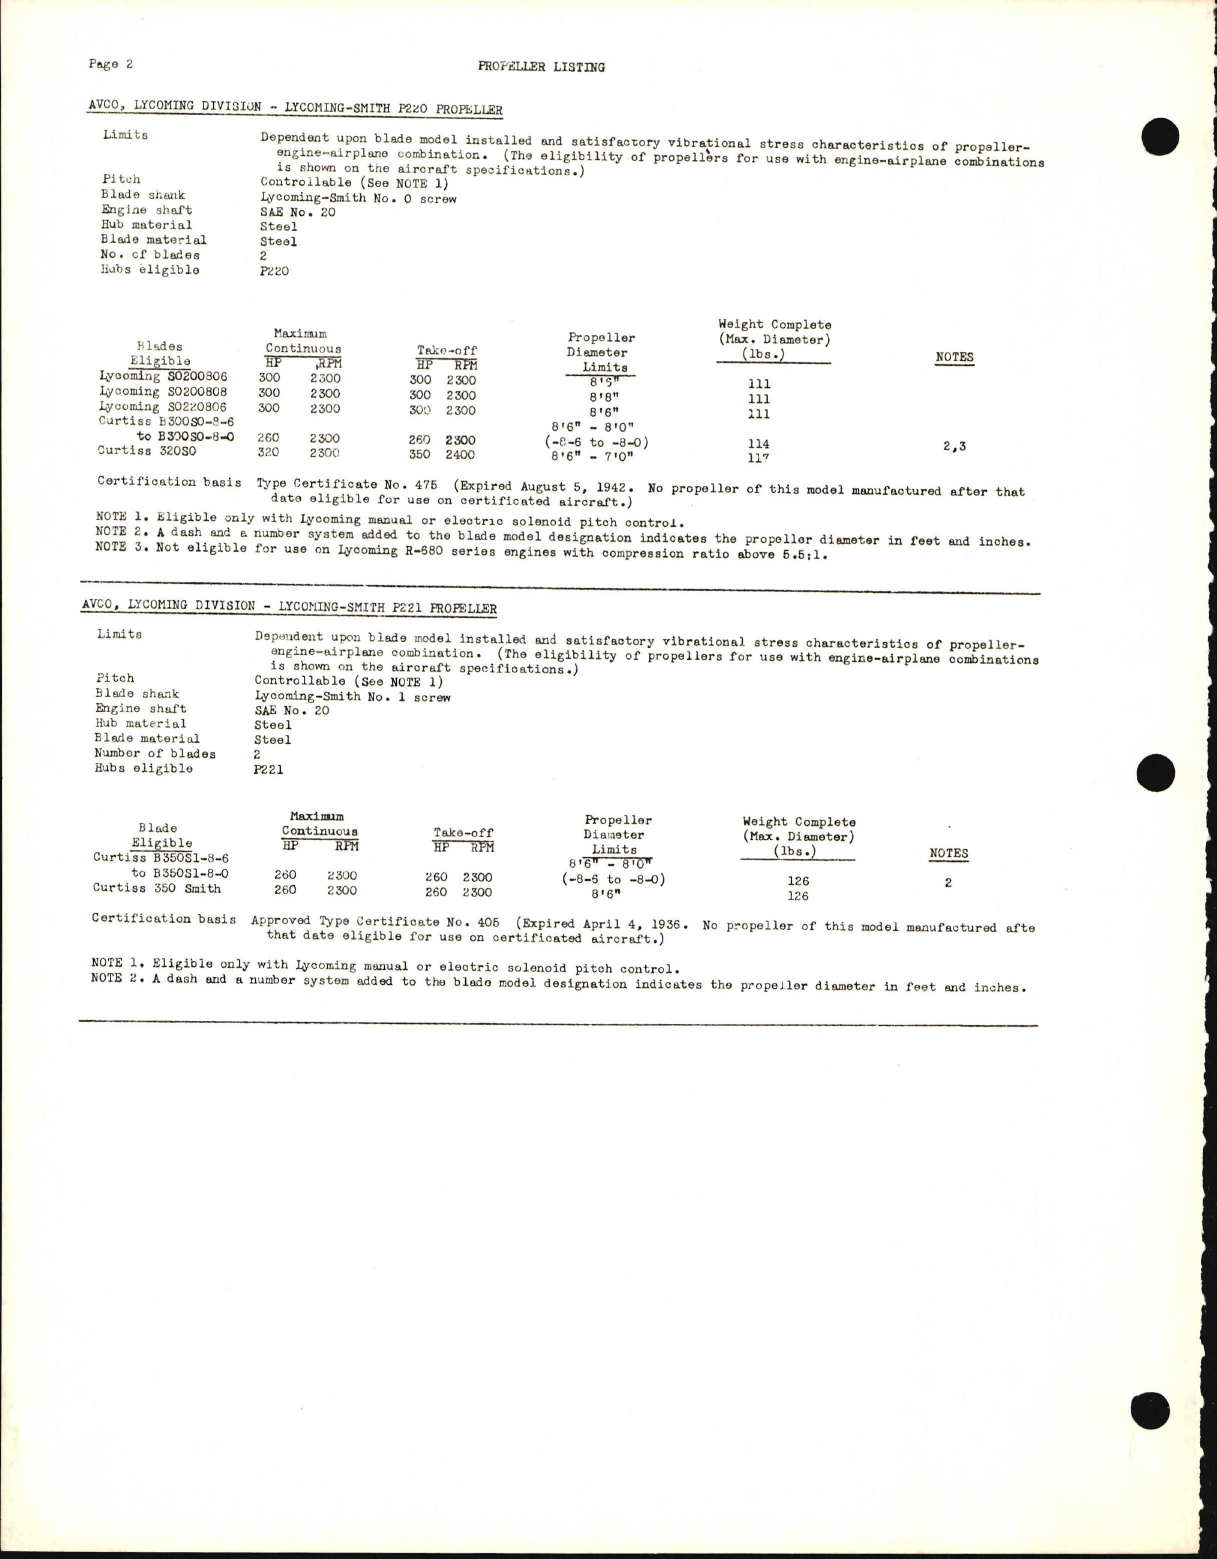 Sample page 6 from AirCorps Library document: Propeller Specifications